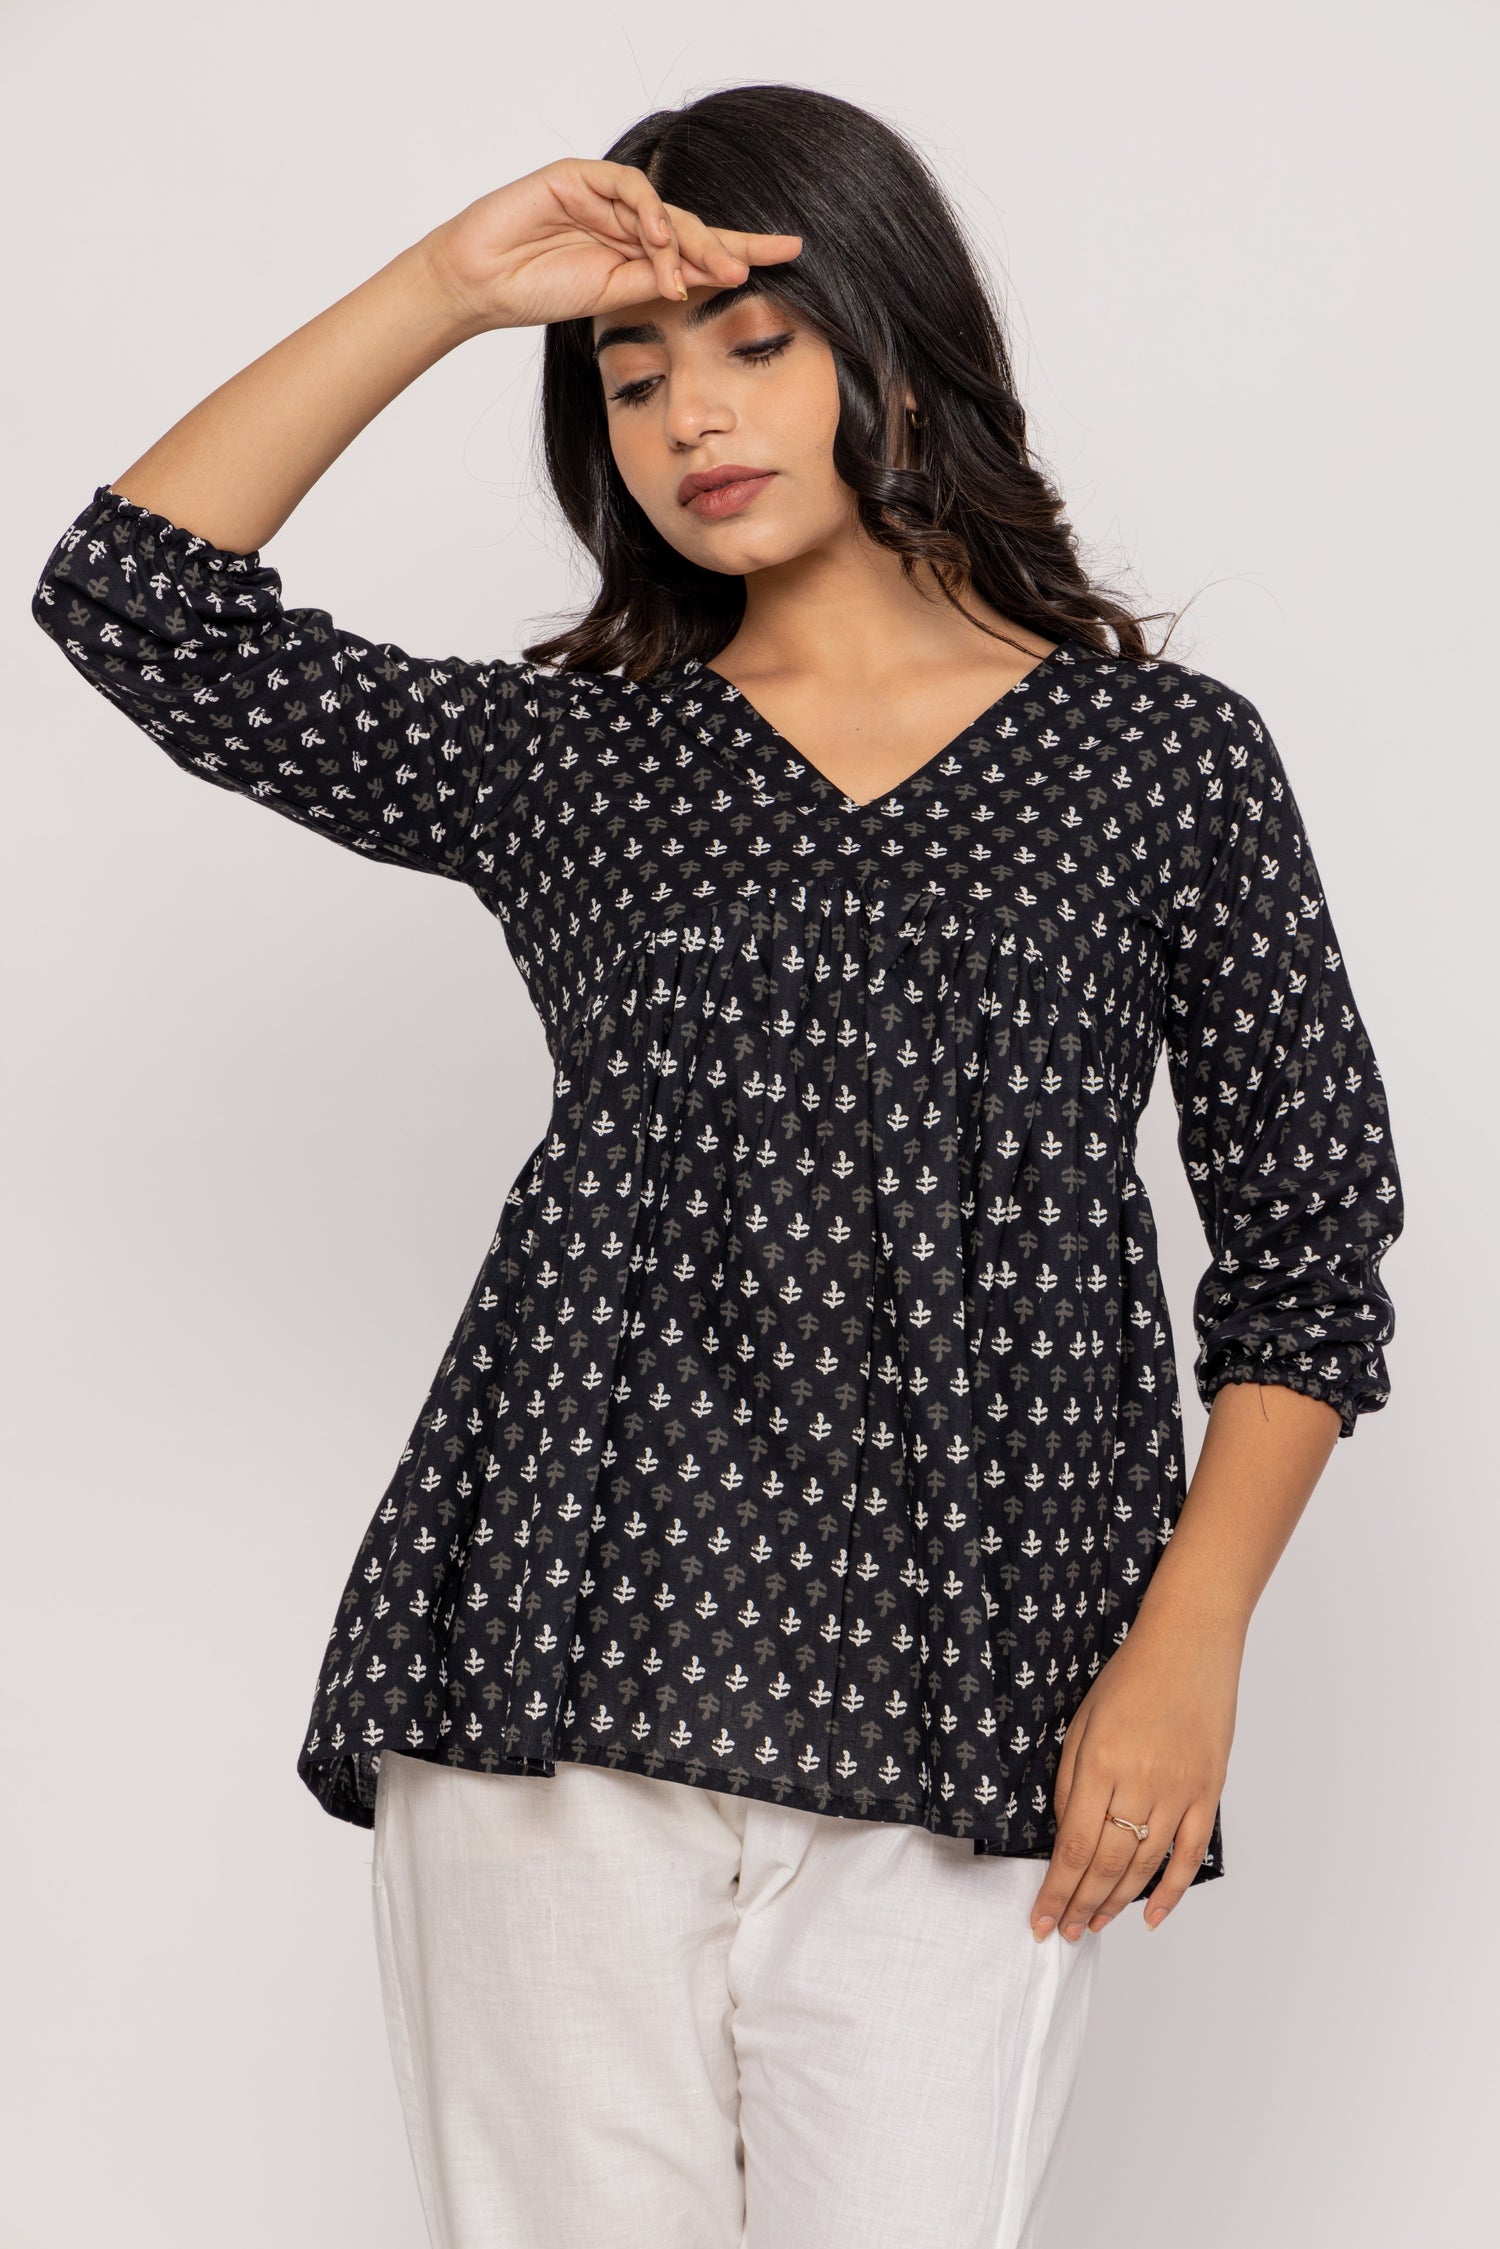 Women's Pure Cotton Floral Print Black Top, Latest Trendy Short Tunic Tops  For Girls at Rs 295/piece, Chanderi Tunic in Jaipur